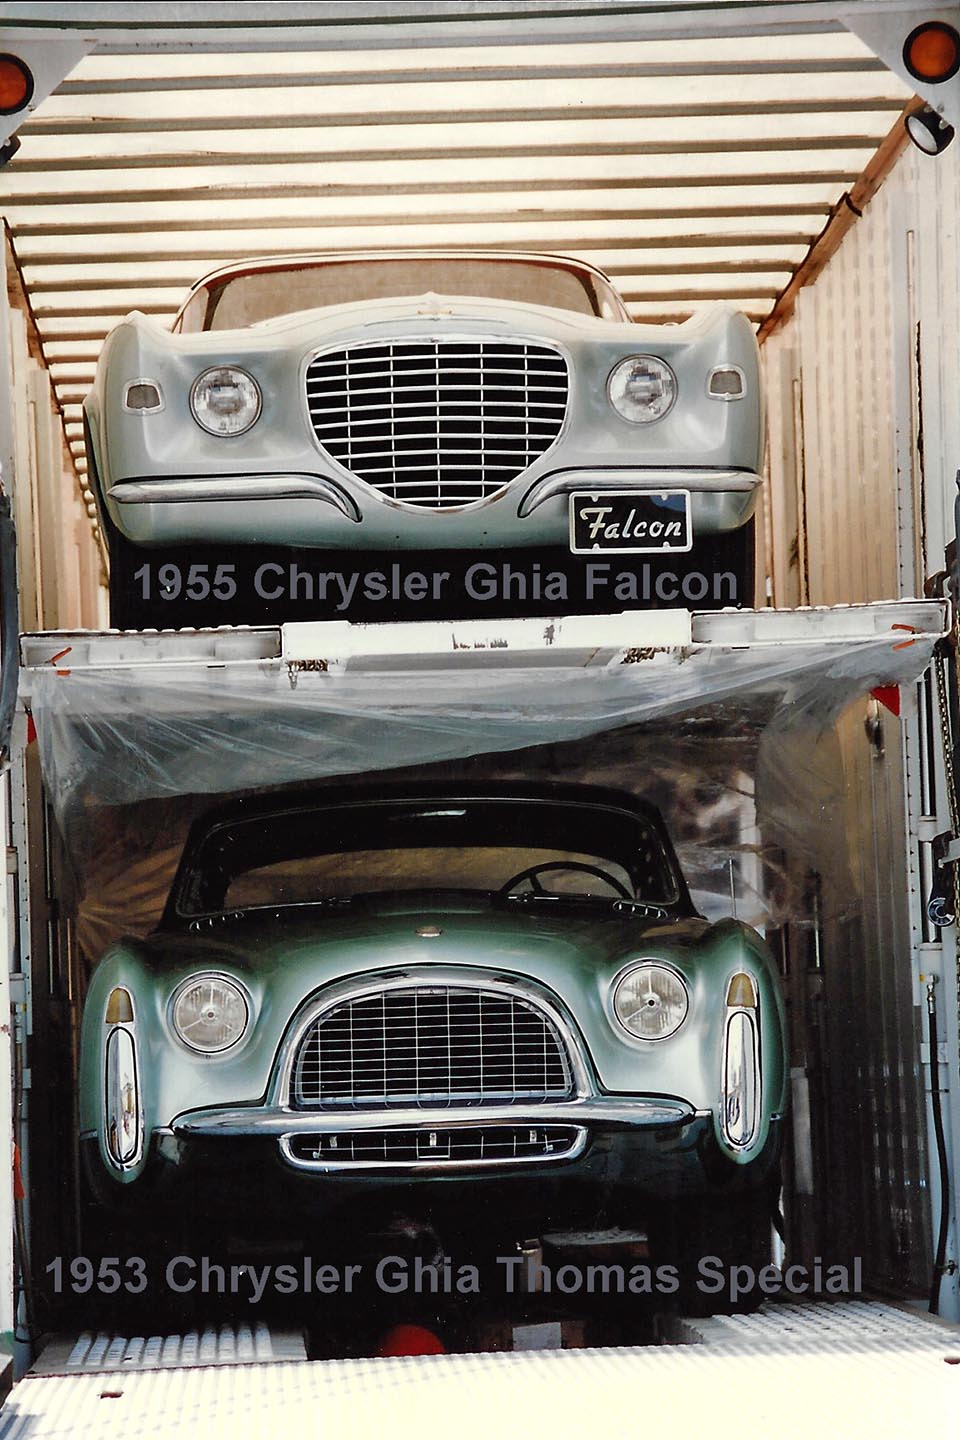 1955 Chrysler Ghia Falcon and 1953 Chrysler Ghia Thomas Special being delivered to the museum.